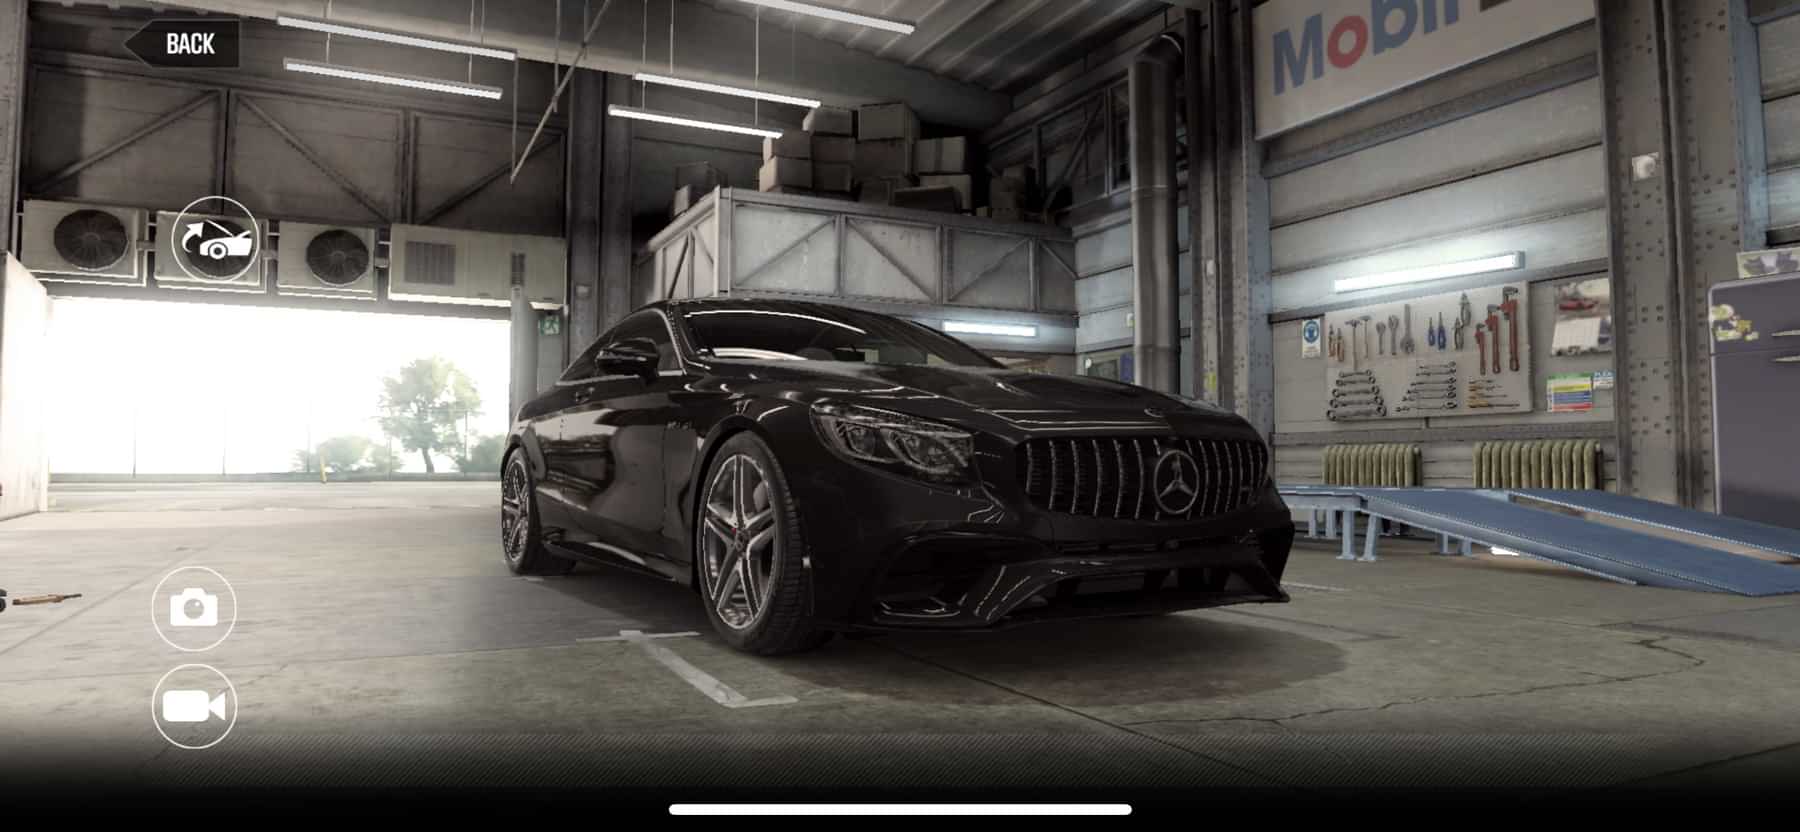 Mercedes AMG S 63 Coupe CSR2, best tune and shift pattern